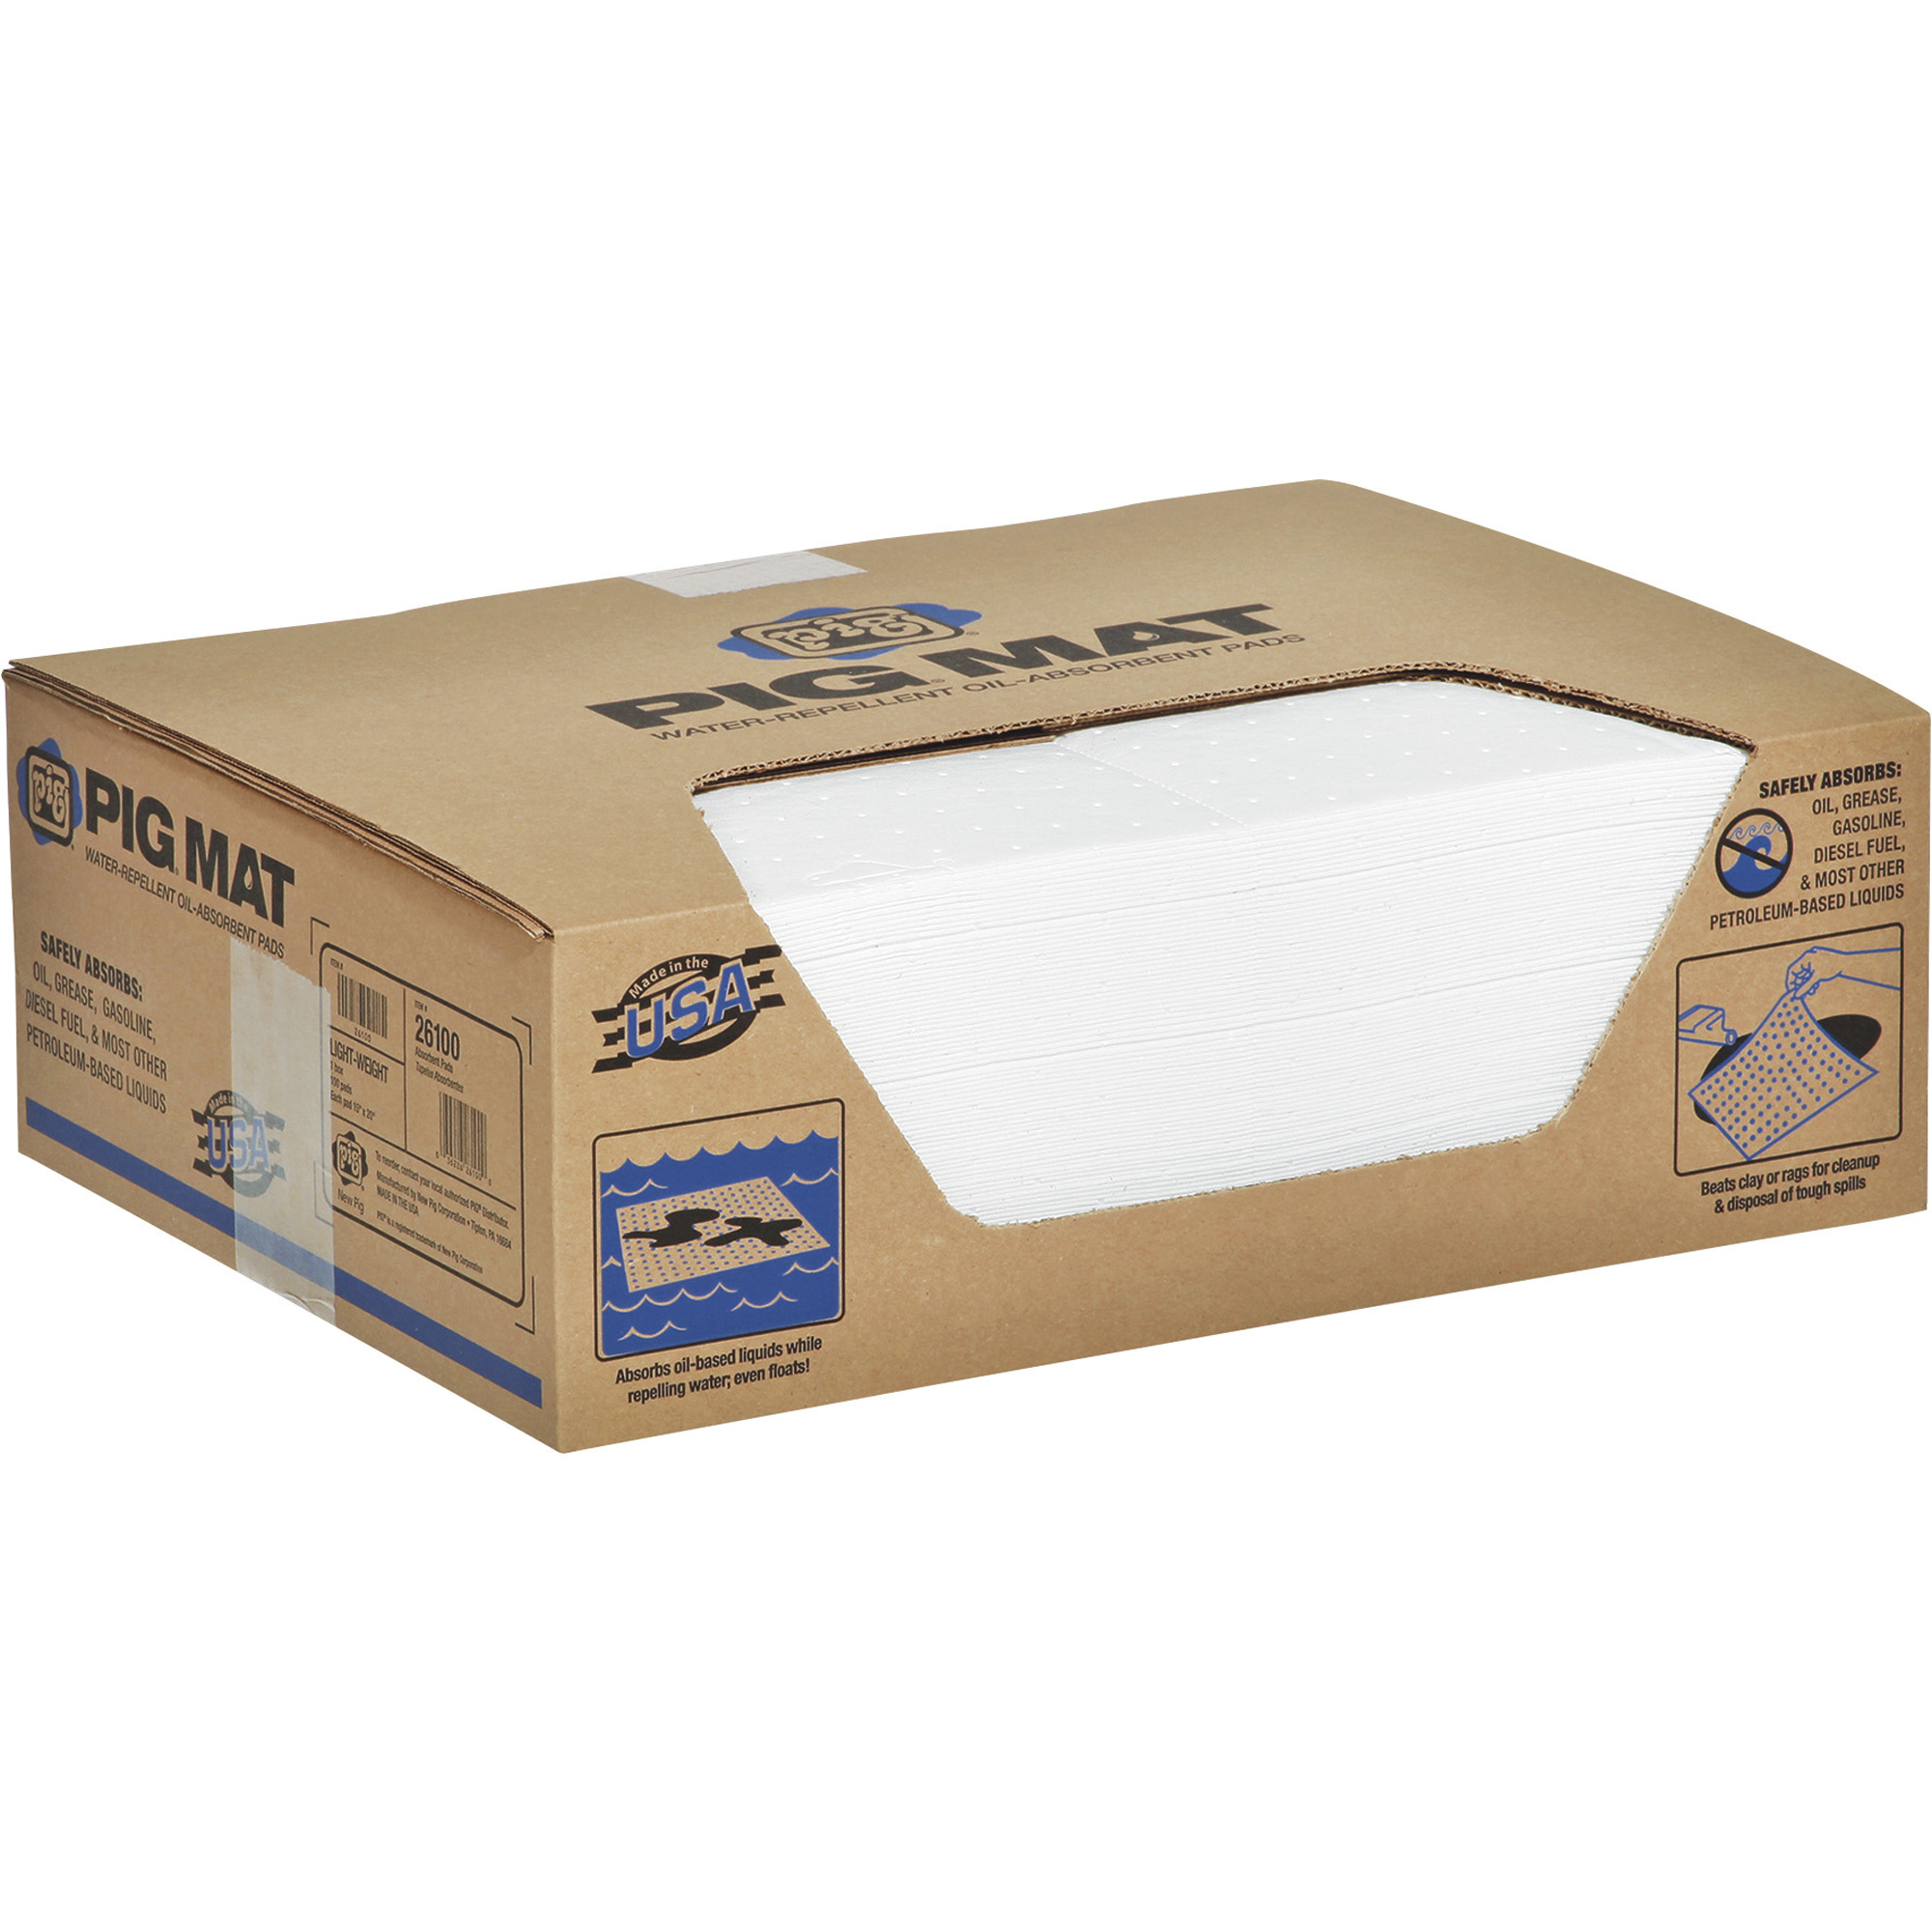 Oil-Only Lightweight Absorbent Pads — Box of 100, 20Inch x 15Inch, Model - New Pig 26100